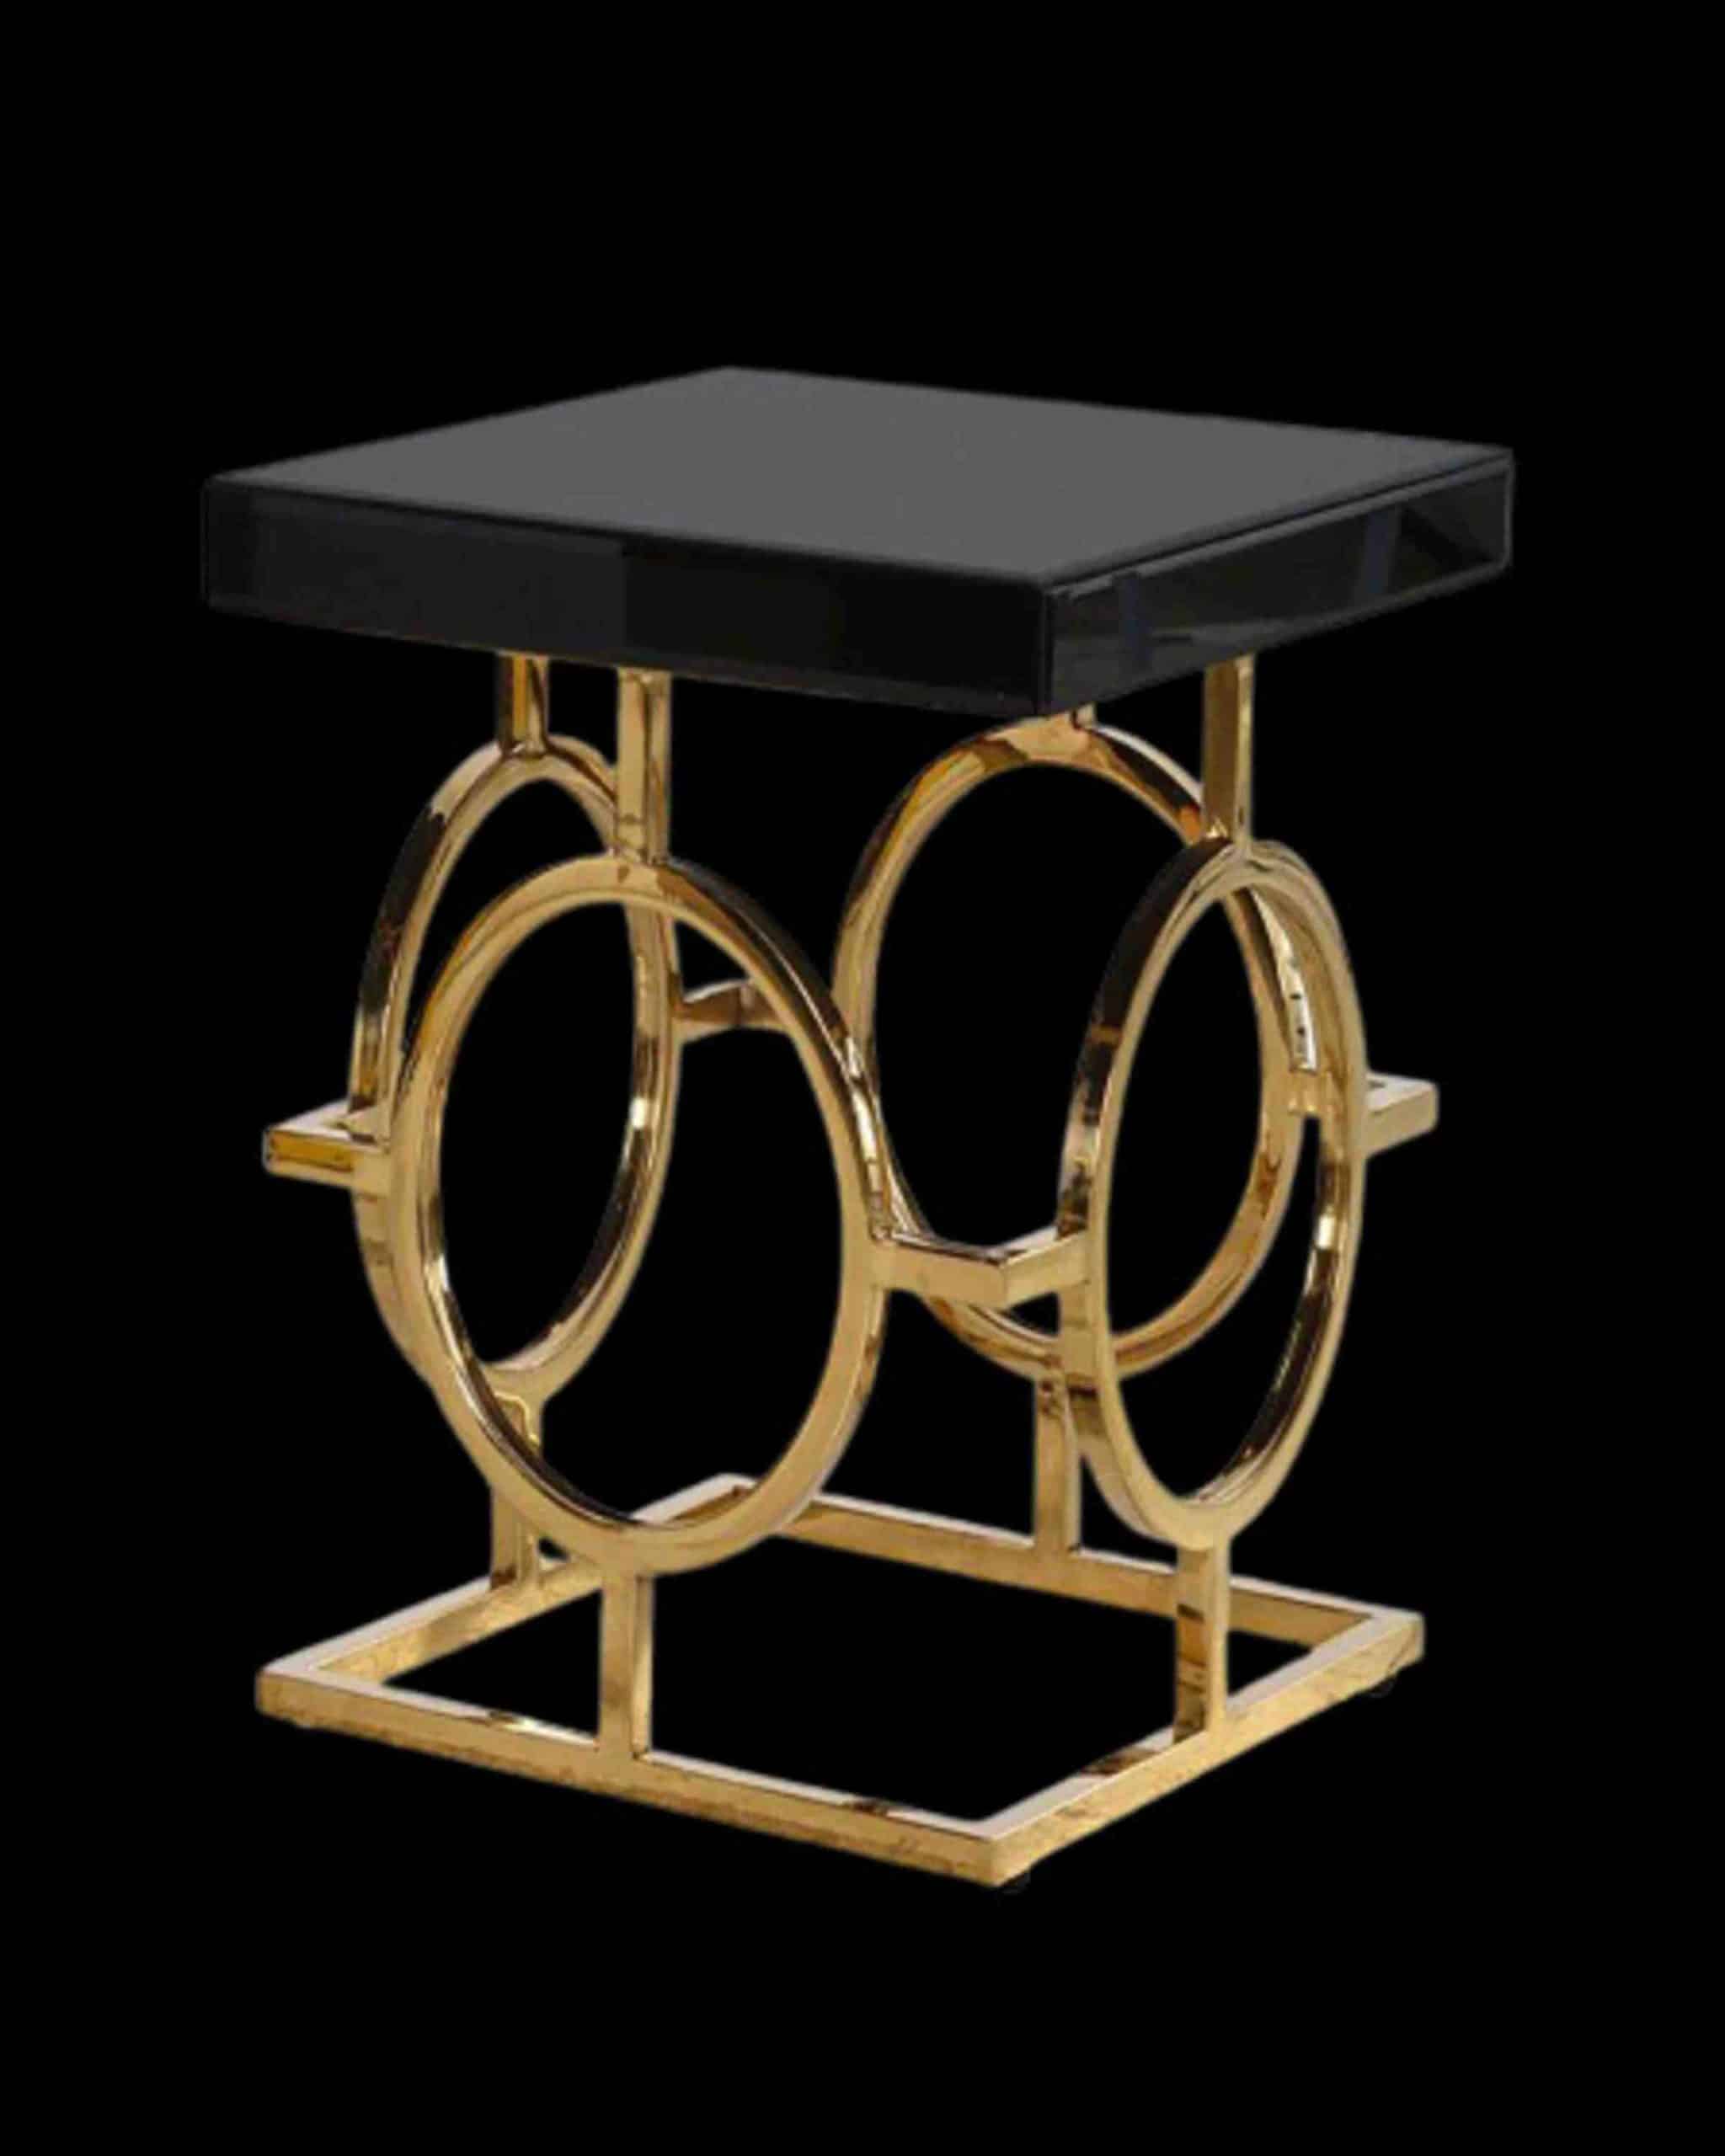 Gem-Metal-Table-ANGIE-KRIPALANI-DESIGN---ANGIE-HOMES-1614587886-compressed